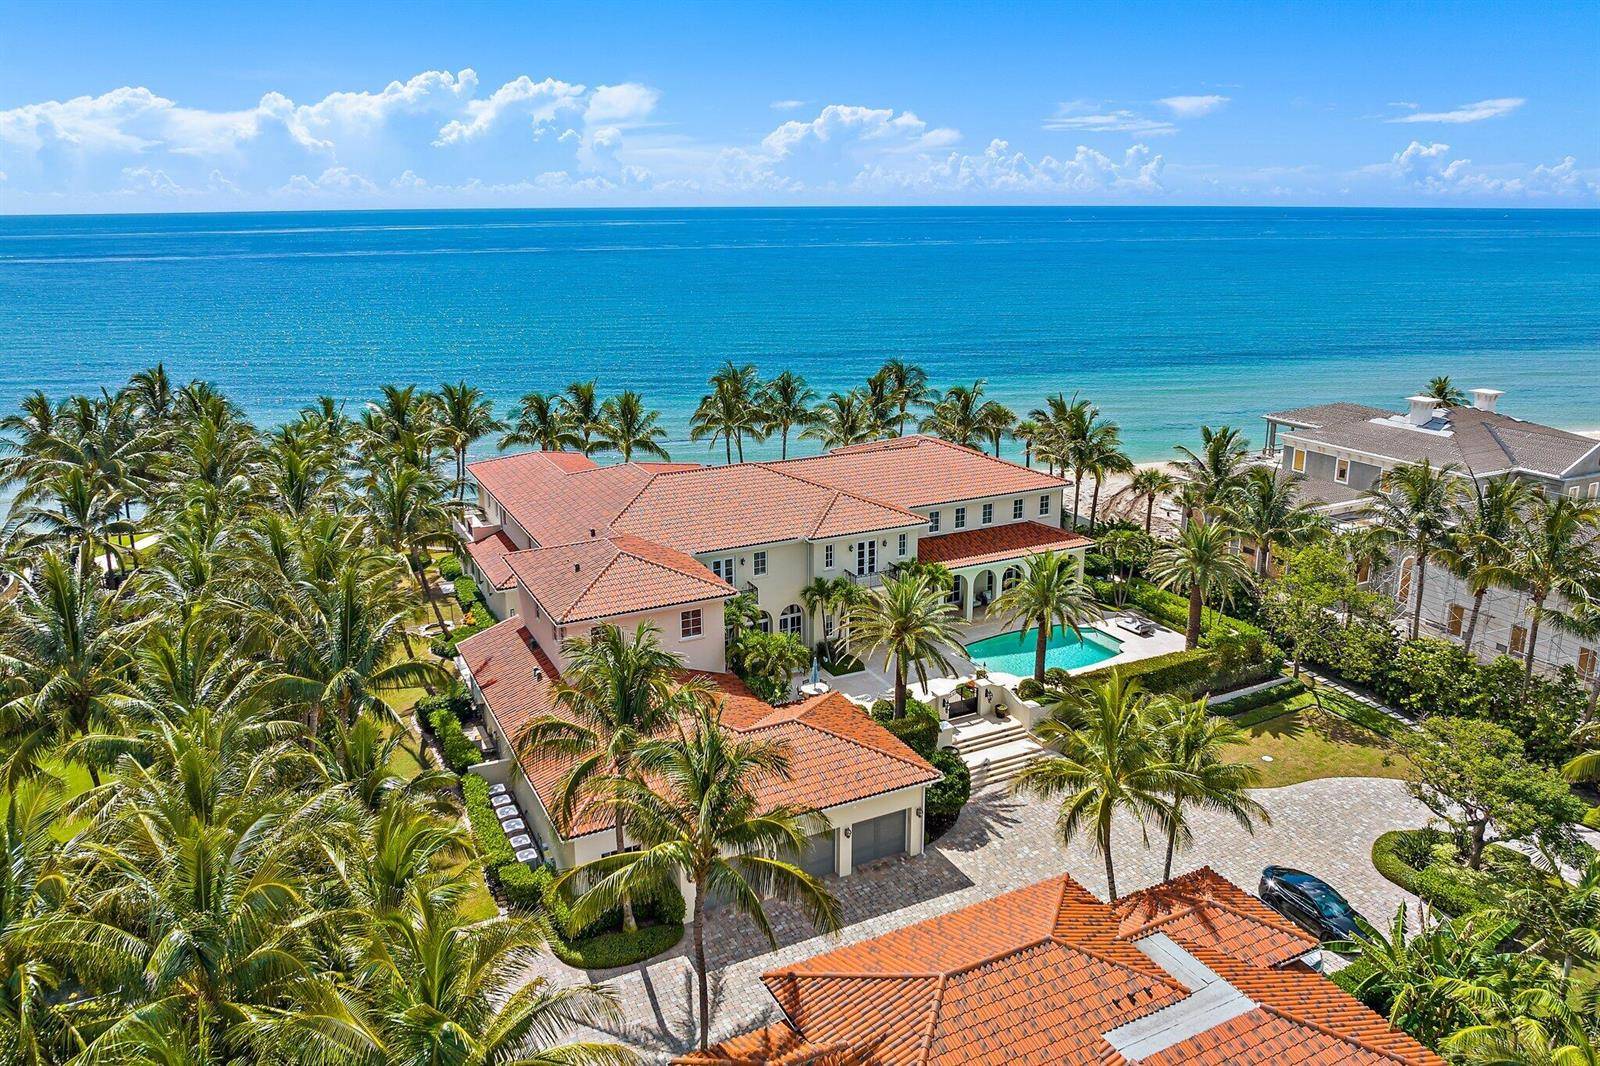 Majestic Oasis on Manalapan's Exclusive Estate Section with Over 200 Feet of Oceanfront and Intracoastal Bliss | 7 Beds | 11 Baths | 16174 sqft